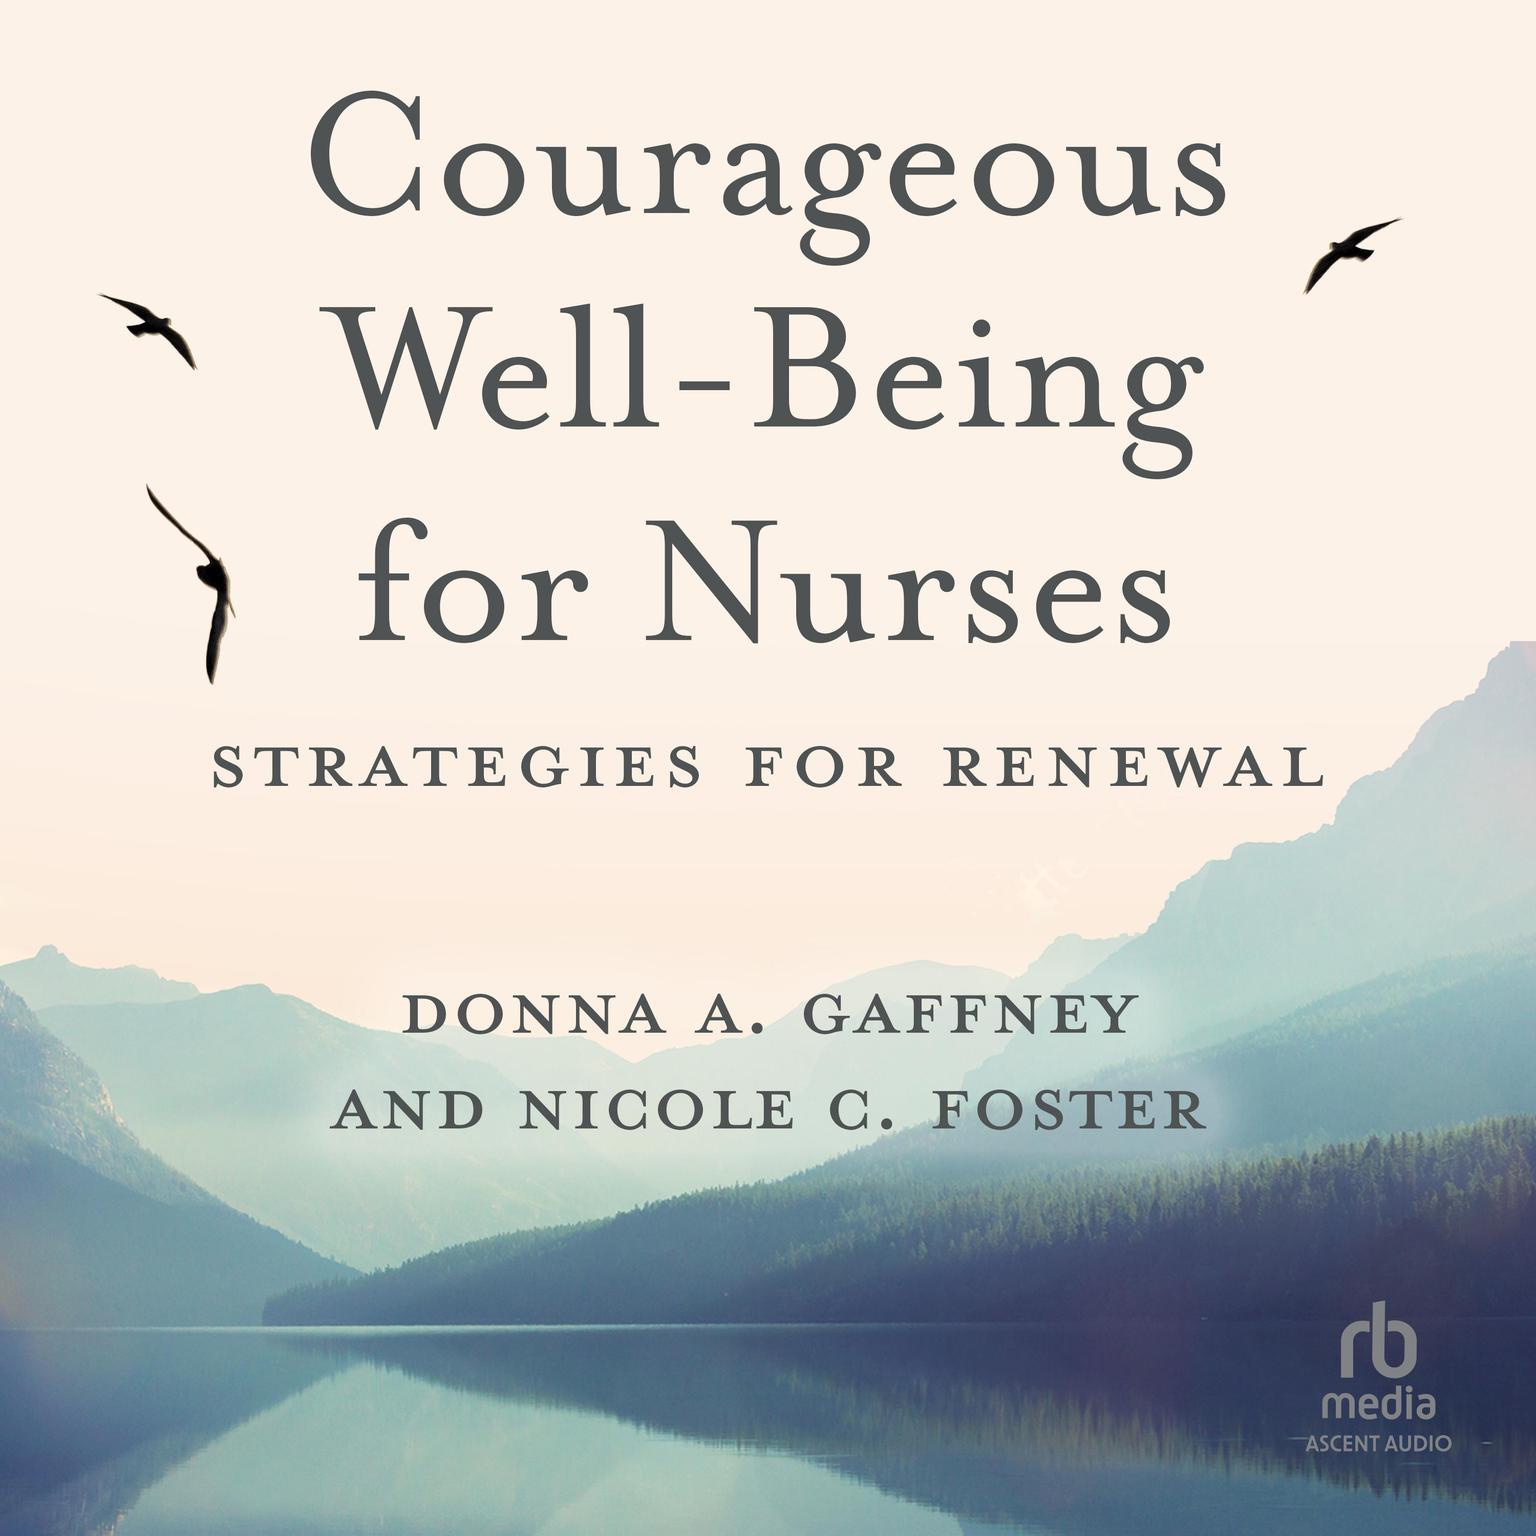 Courageous Well-Being for Nurses: Strategies for Renewal Audiobook, by Donna A. Gaffney